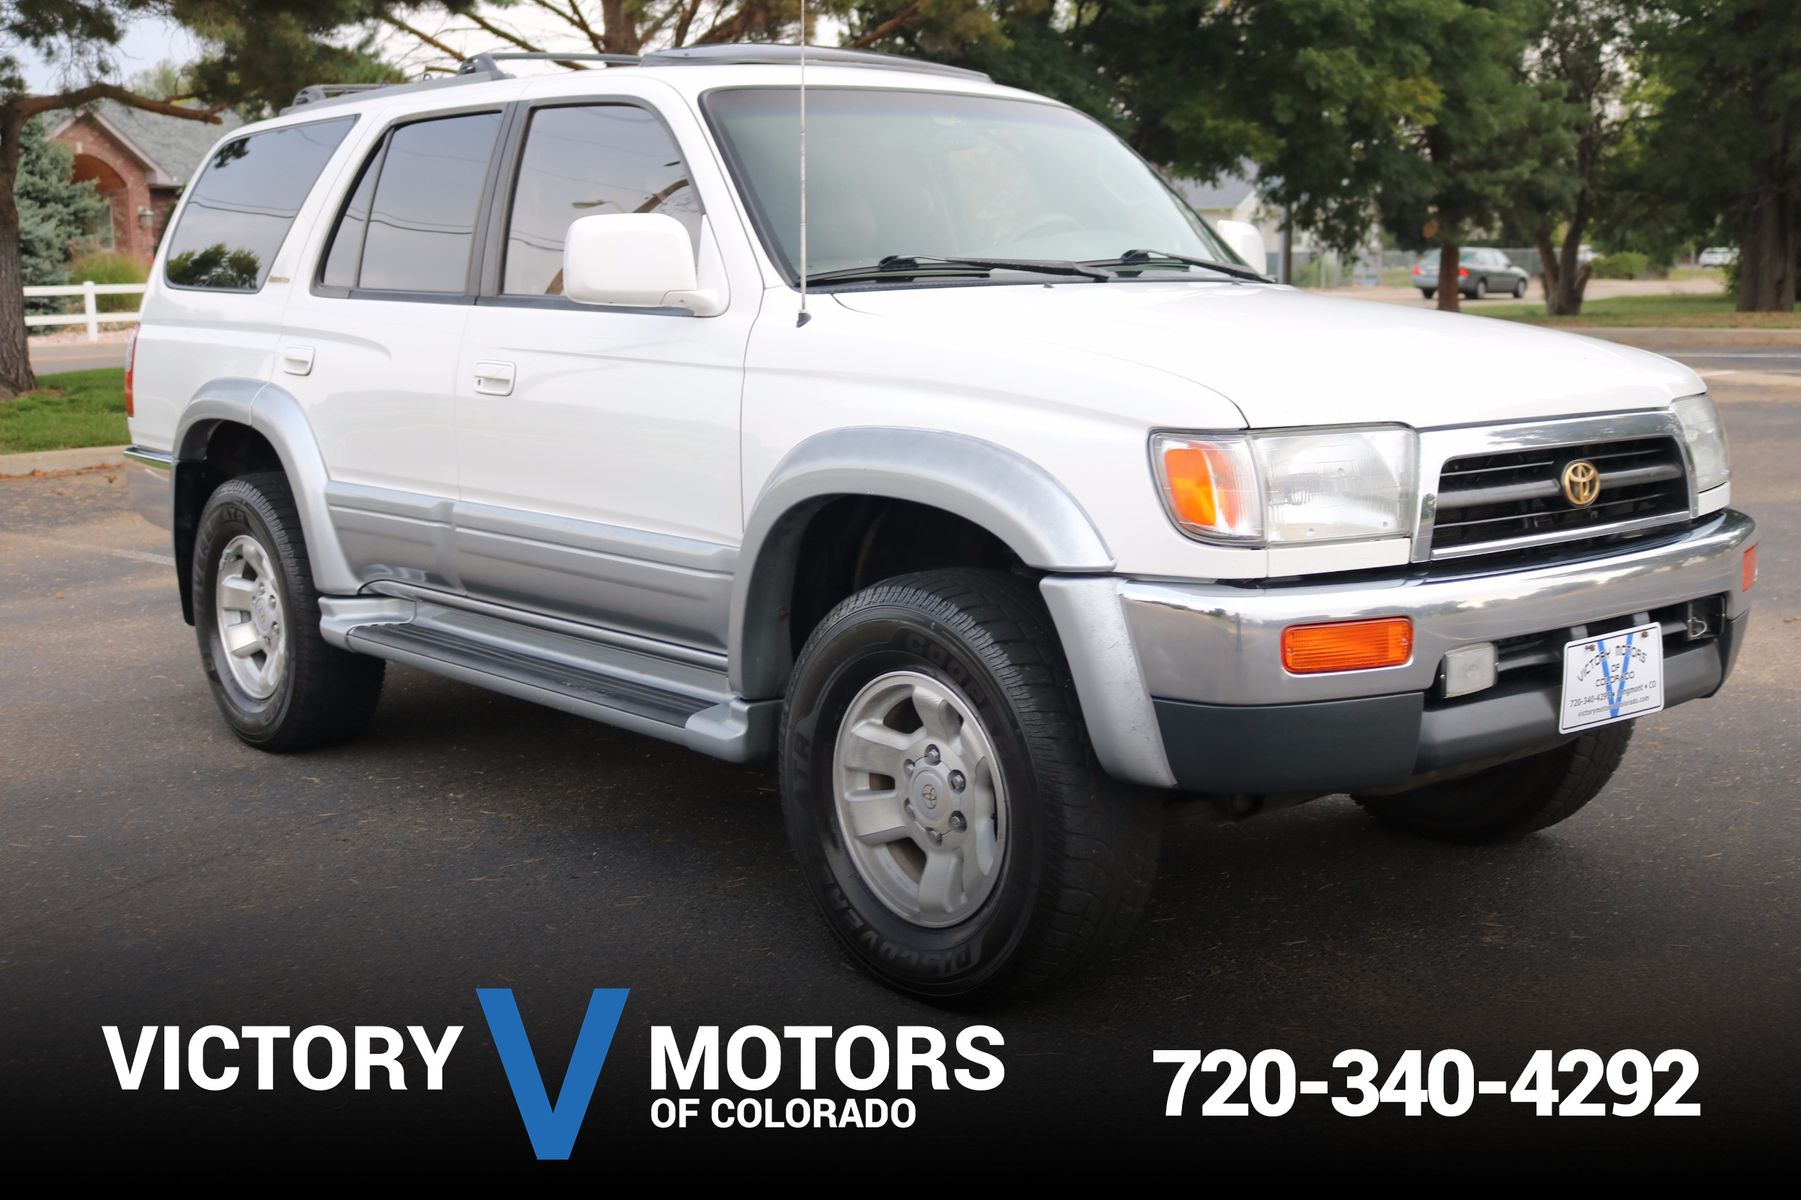 1998 Toyota 4Runner Limited | Victory Motors of Colorado